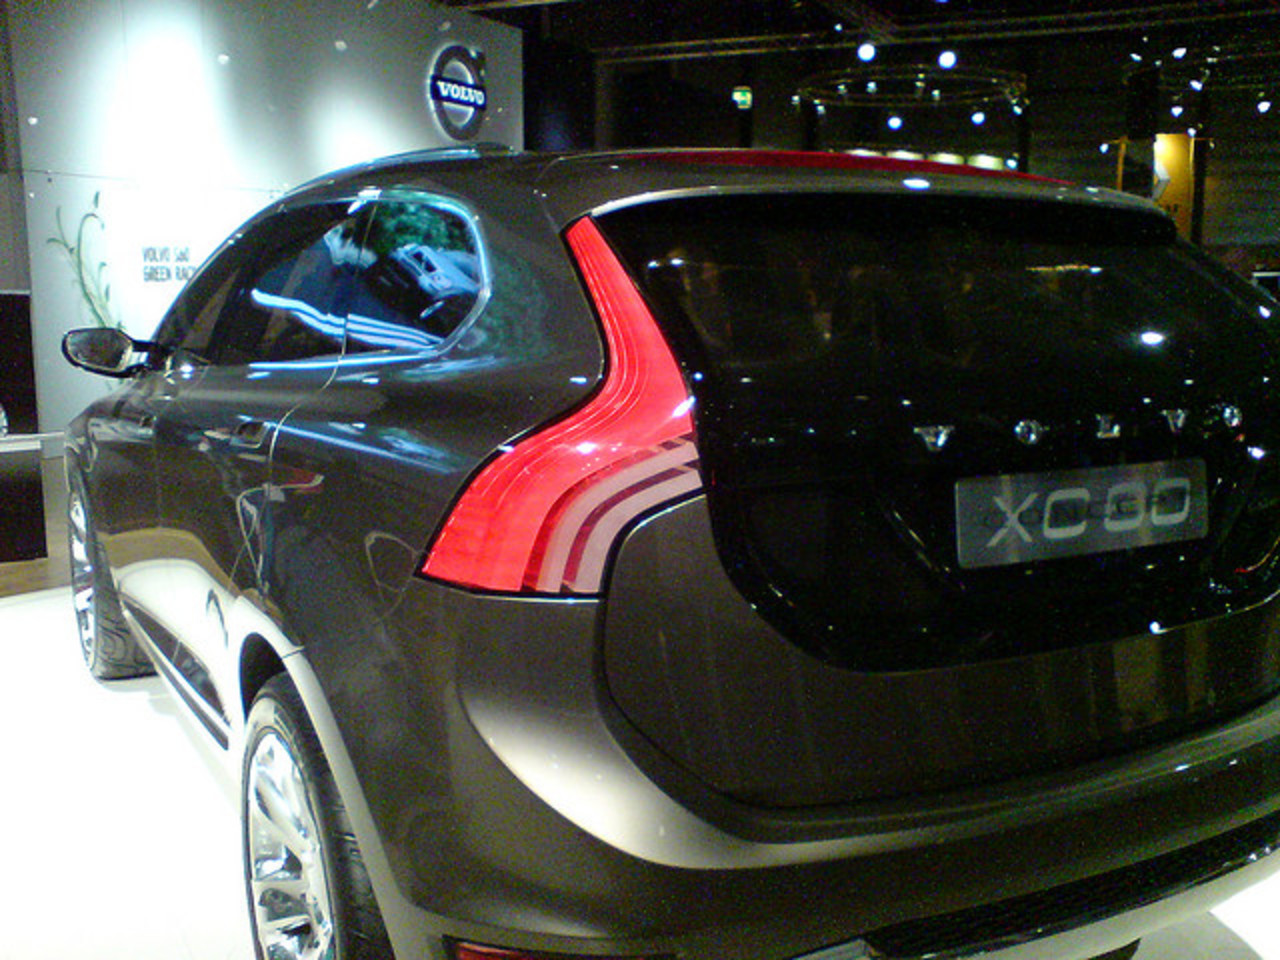 Volvo XC80 â€” a model manufactured by Volvo. The model received many reviews